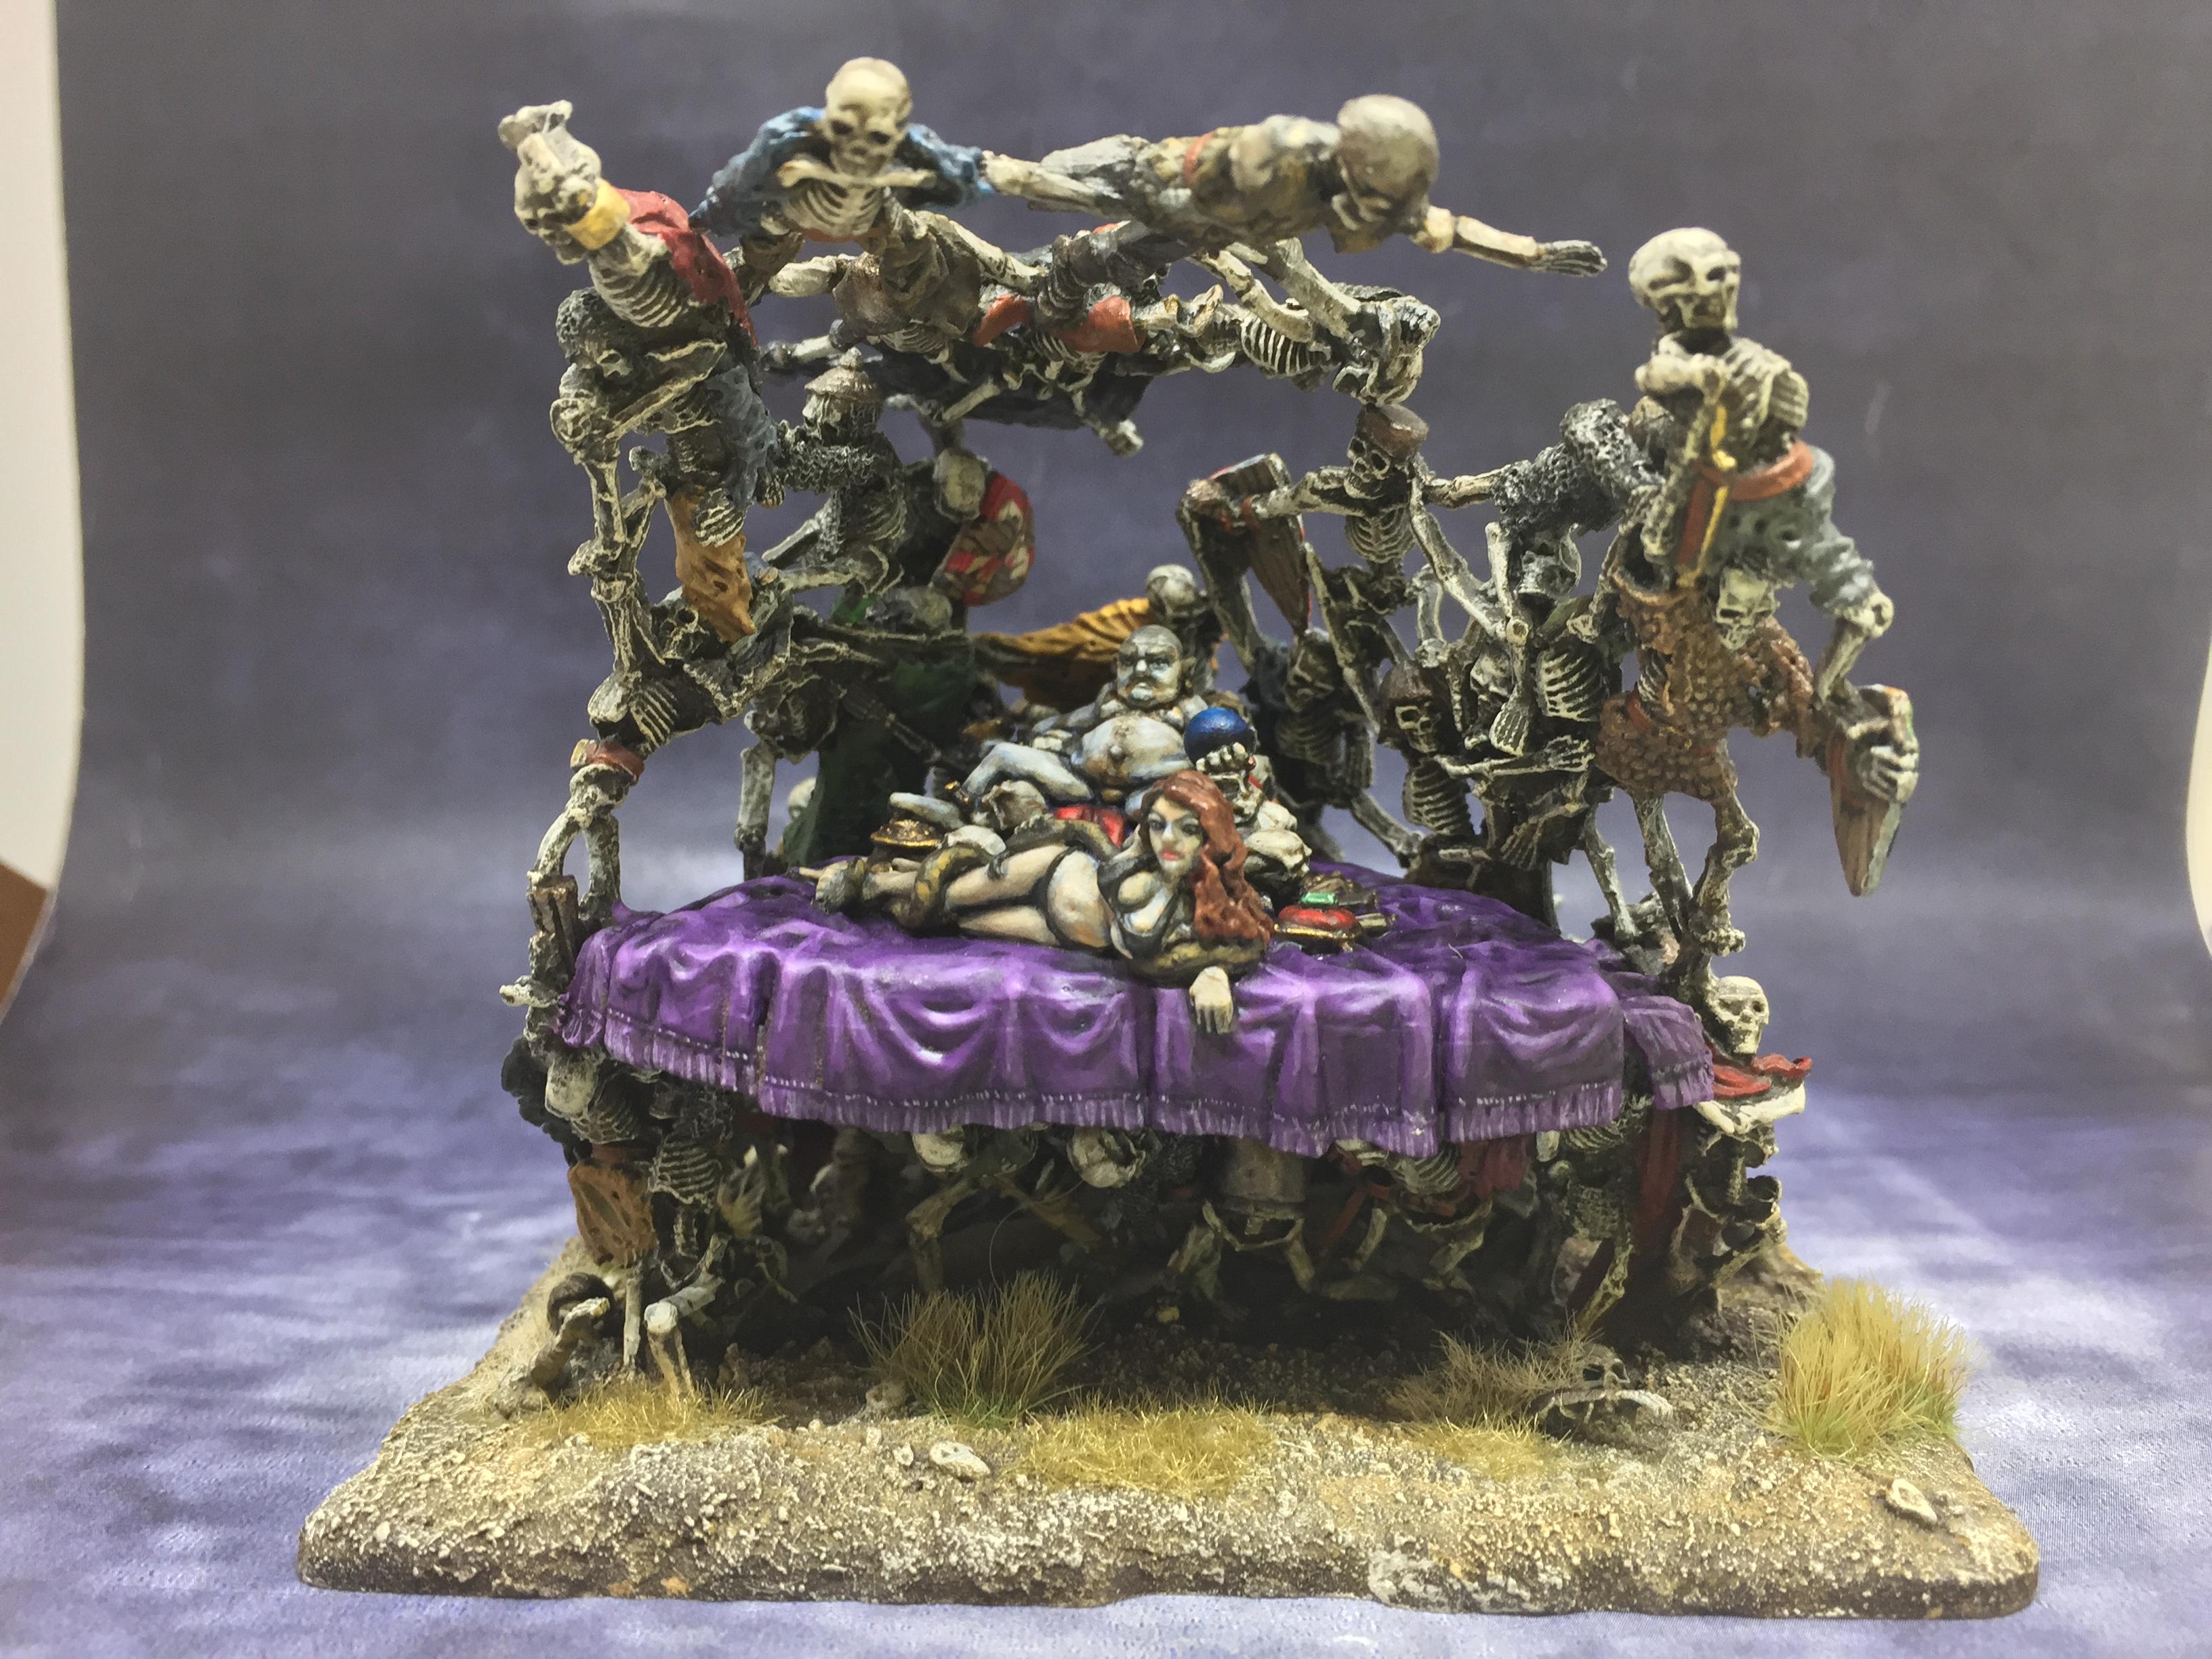 Bone, Necromancer, Out Of Production, Ral Partha, September 2020, Skeletons, Throne, Throne Of Bone, Undead